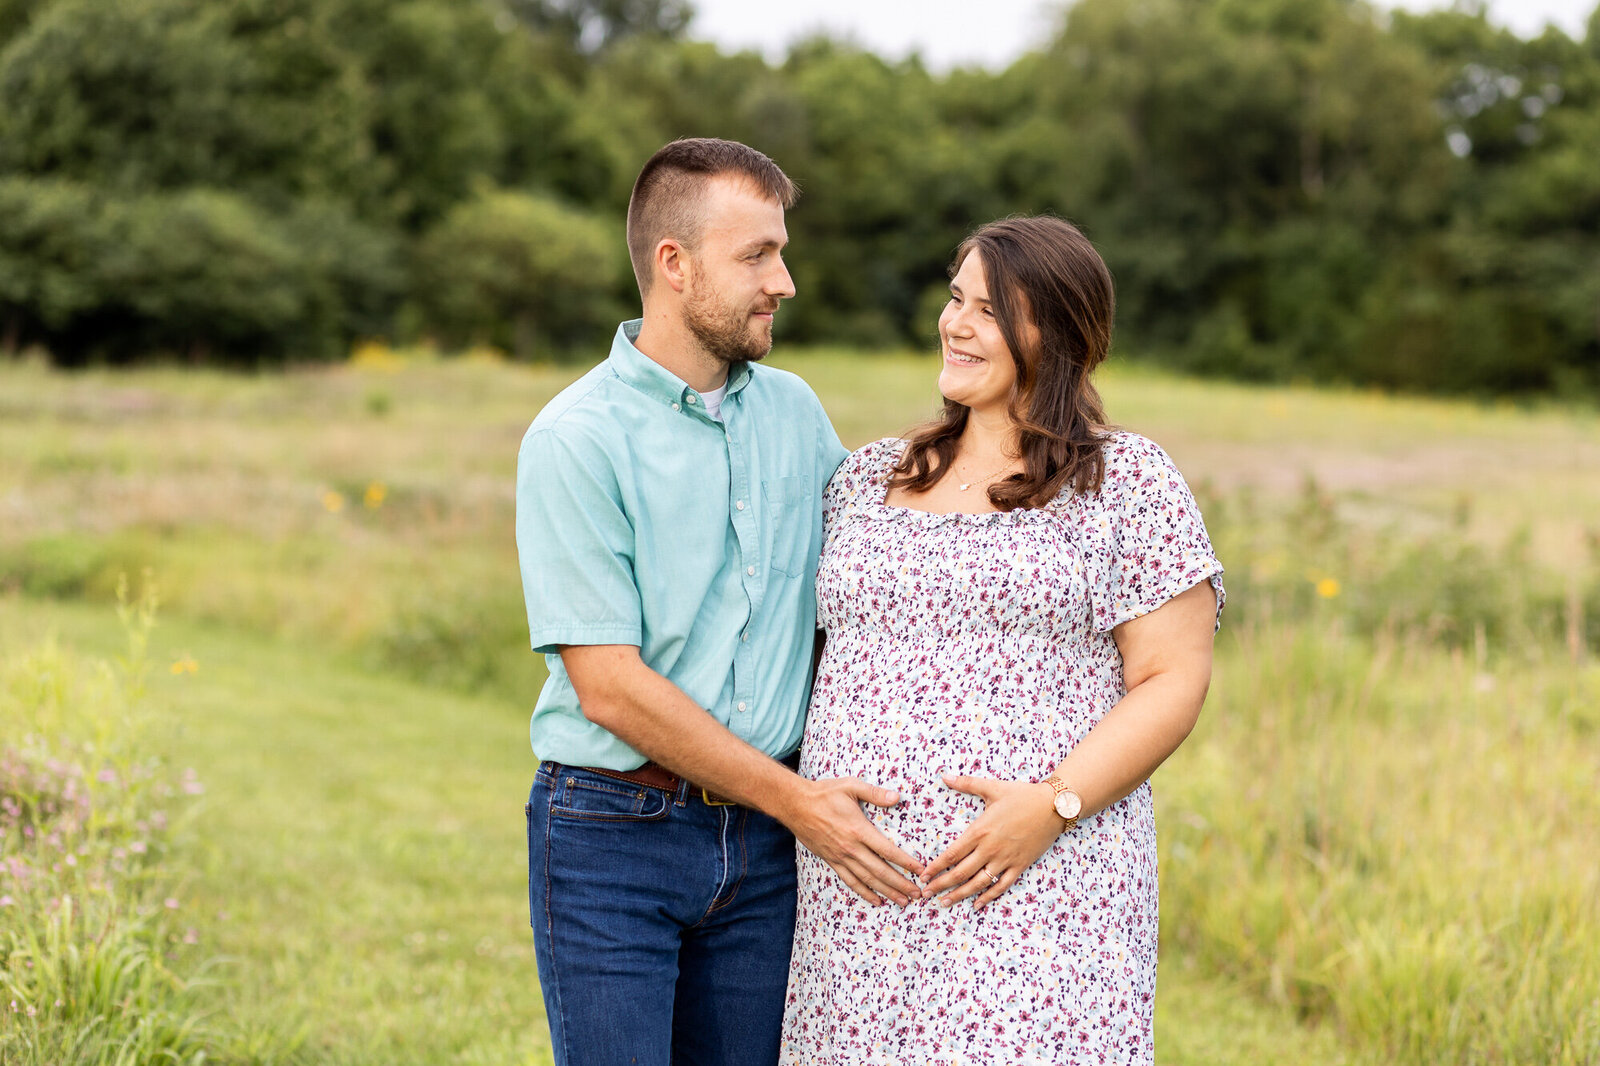 Outdoor-maternity-photography-session-golden-hour-Frankfort-KY-6